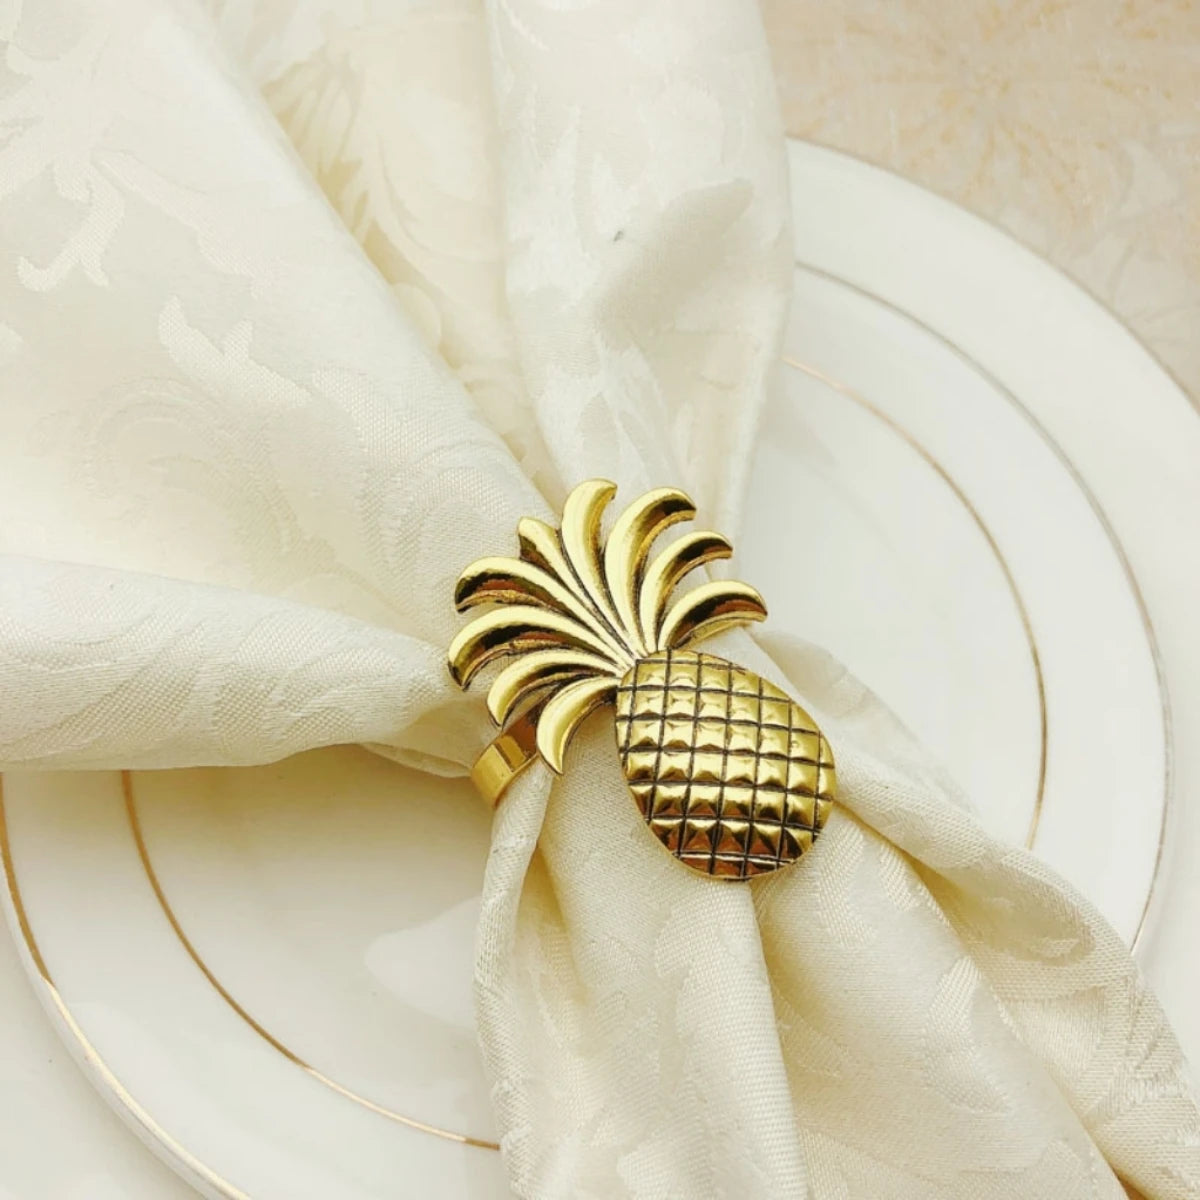 10Pcs/Lot Hot Sale Pineapple Napkin Ring Metal Plating Napkin Ring Ring Stand Wedding Holiday Party Table Decoration